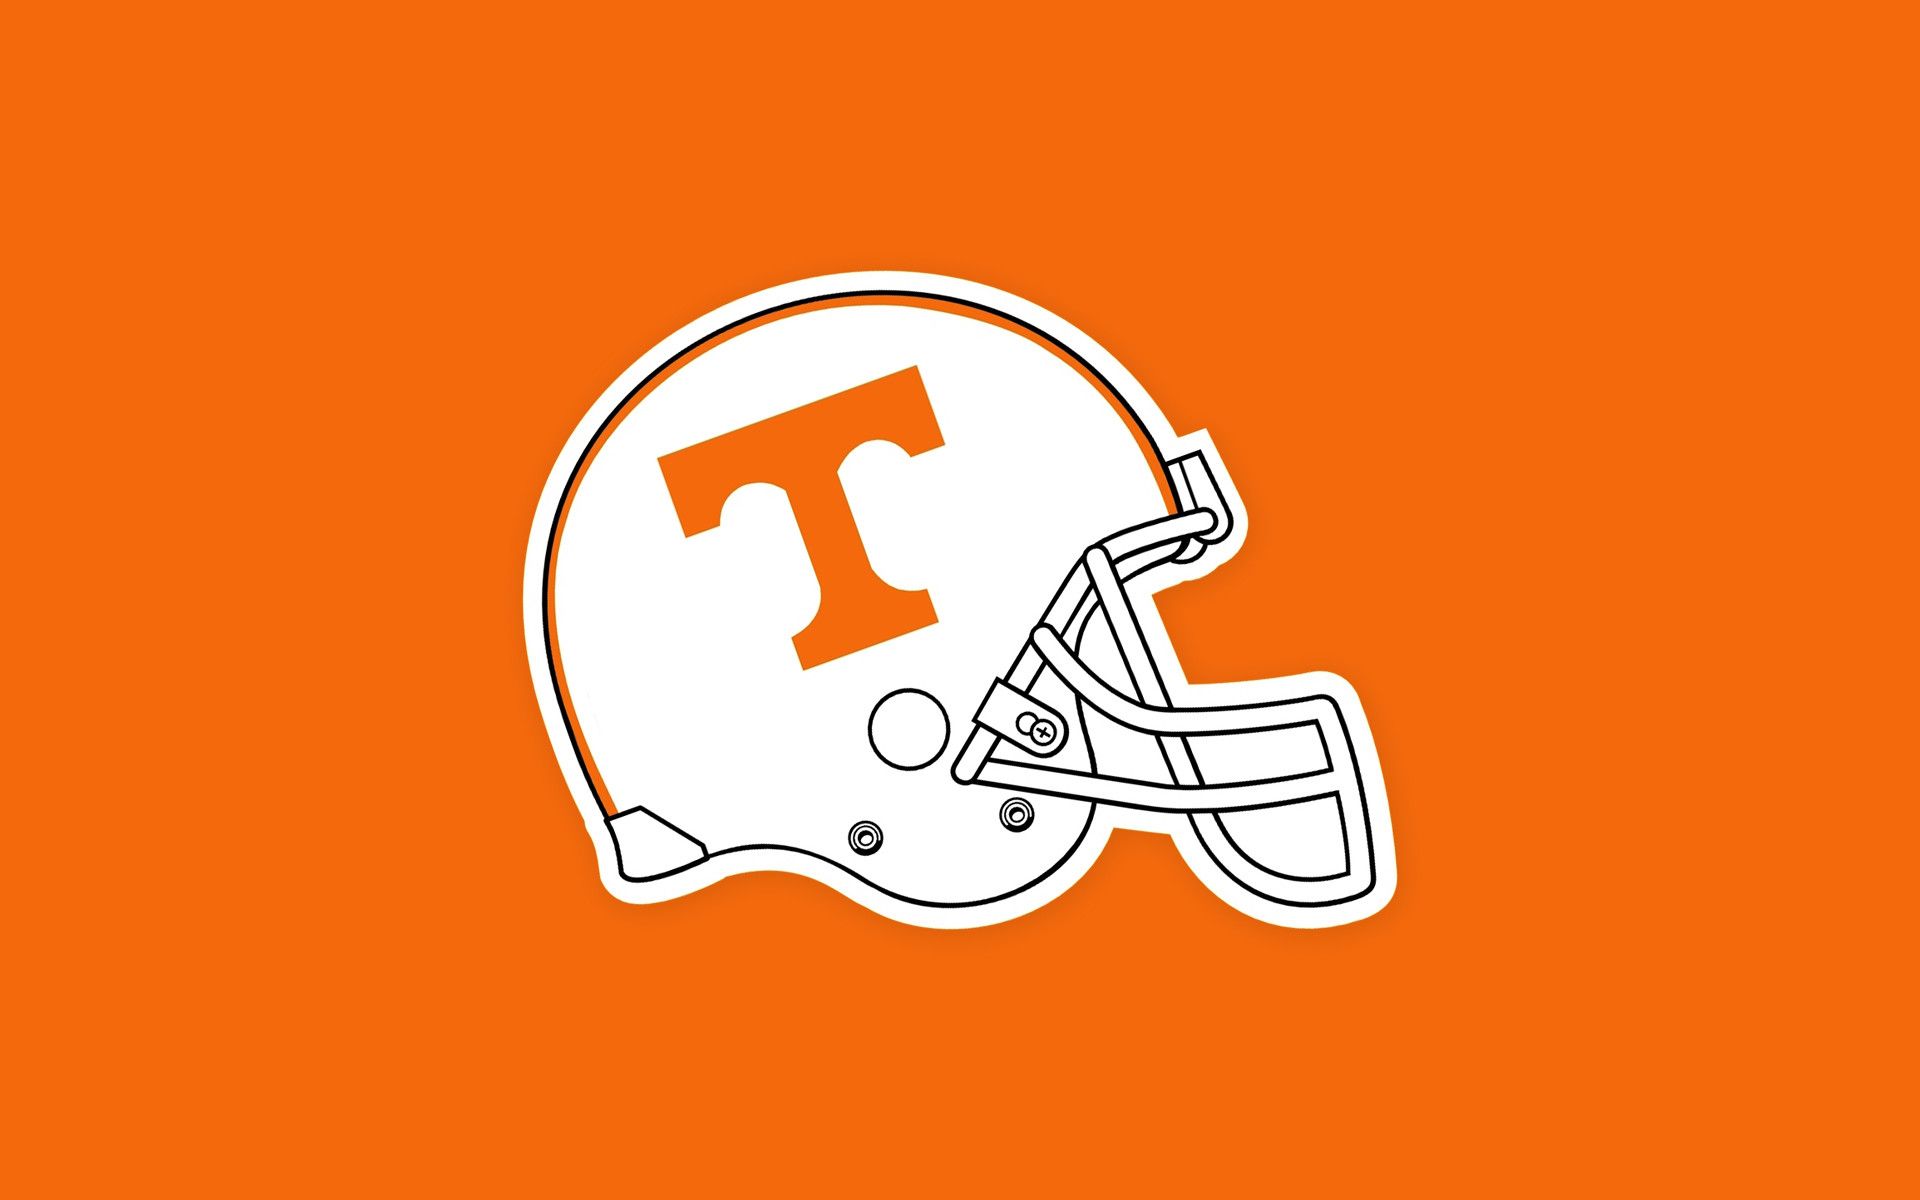 Tennessee Wallpapers